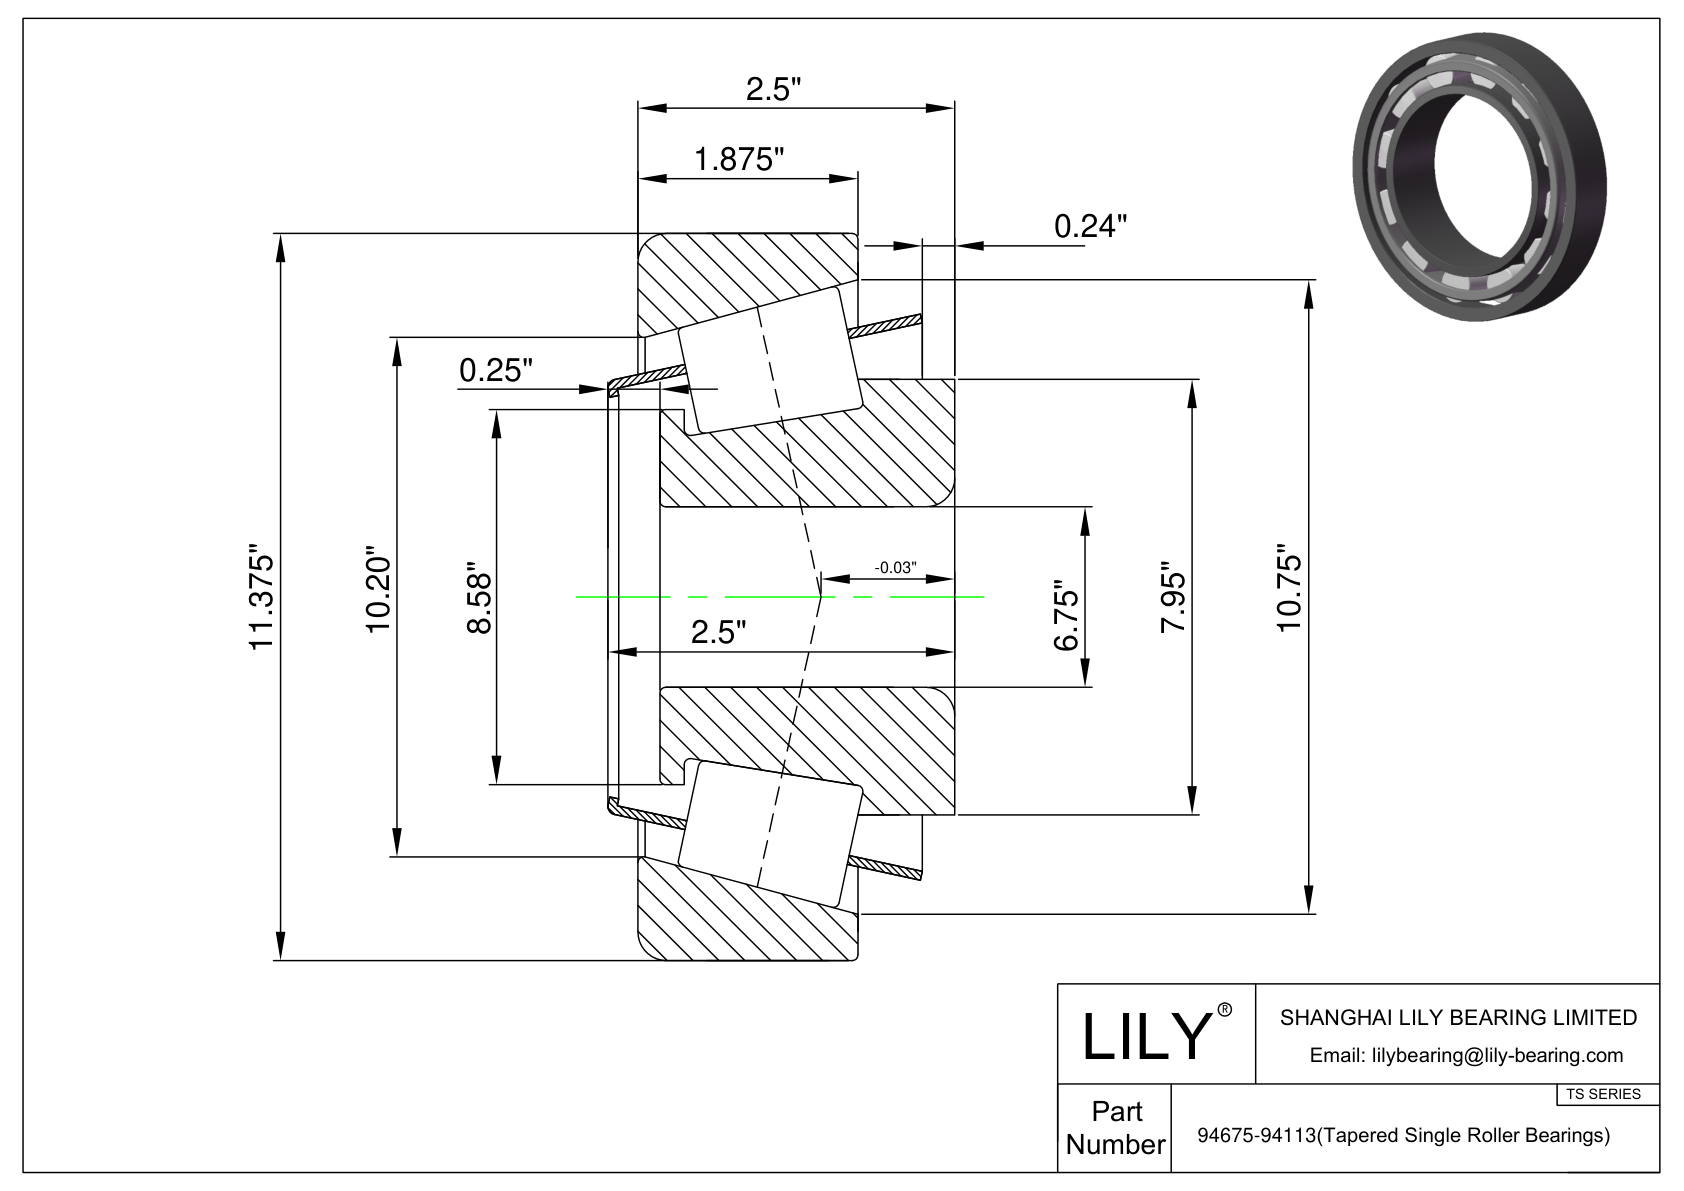 94675-94113 TS (Tapered Single Roller Bearings) (Imperial) cad drawing